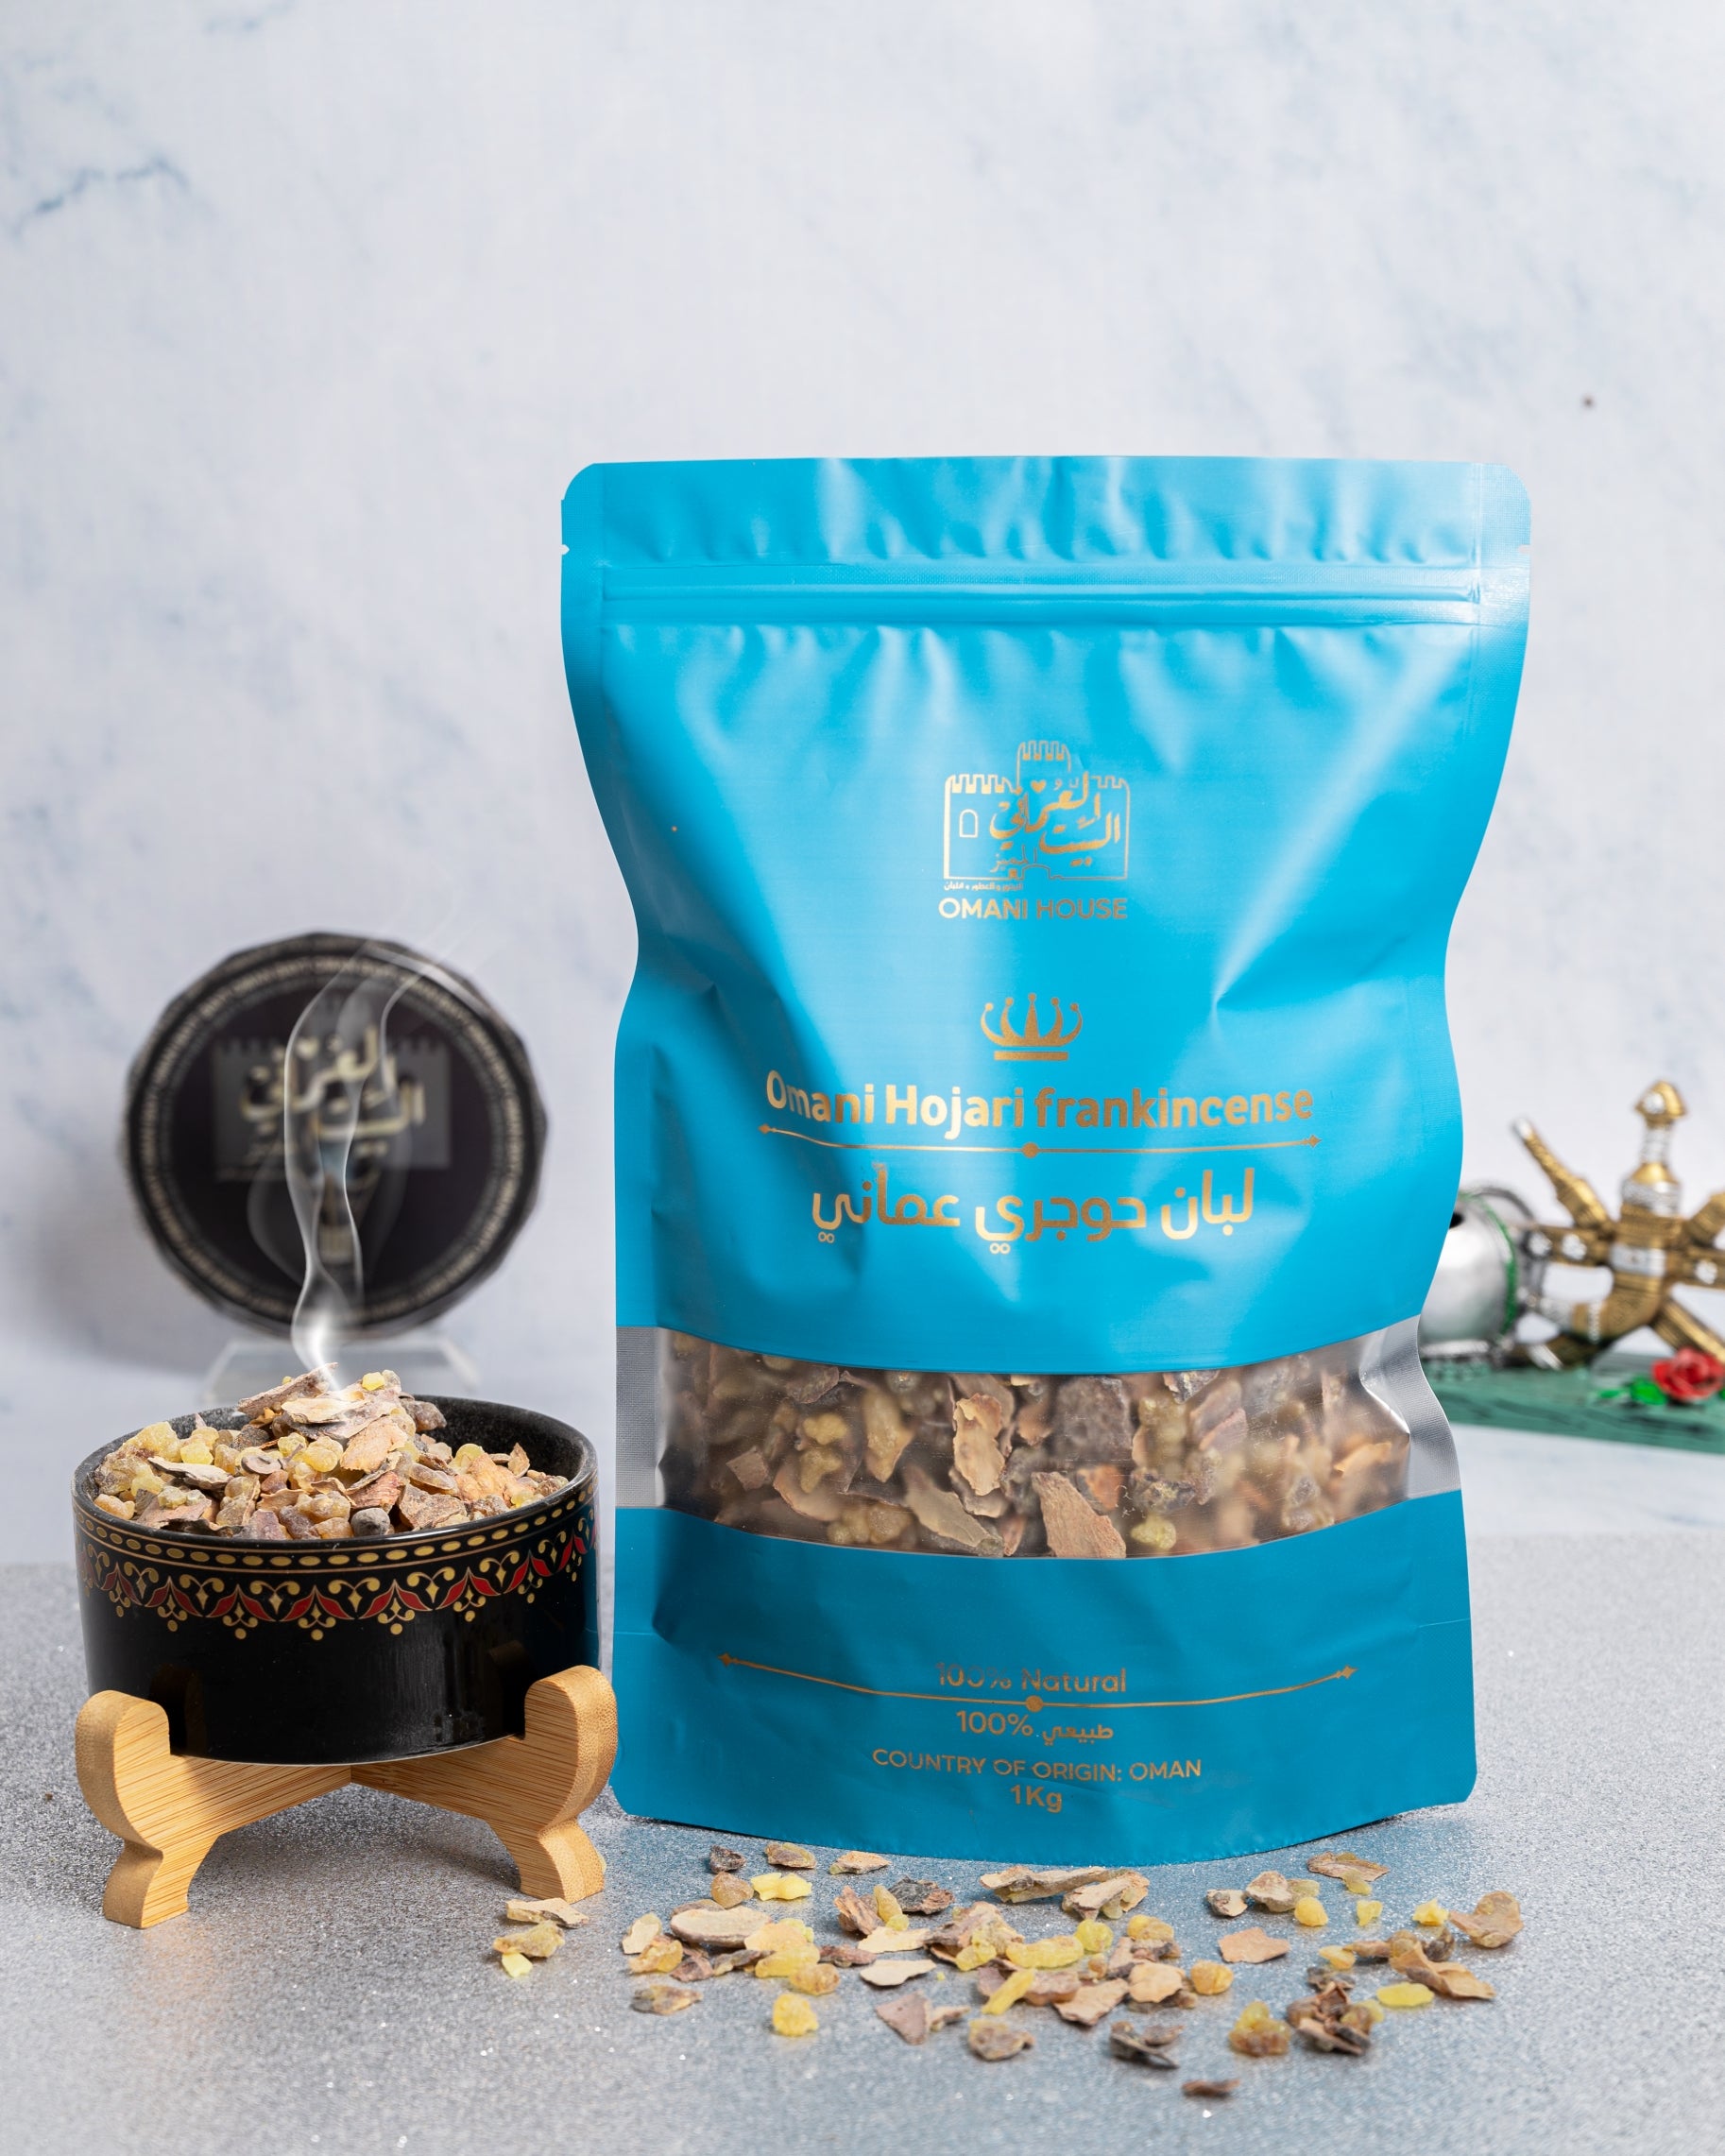 Frankincense with frankincense tree peels